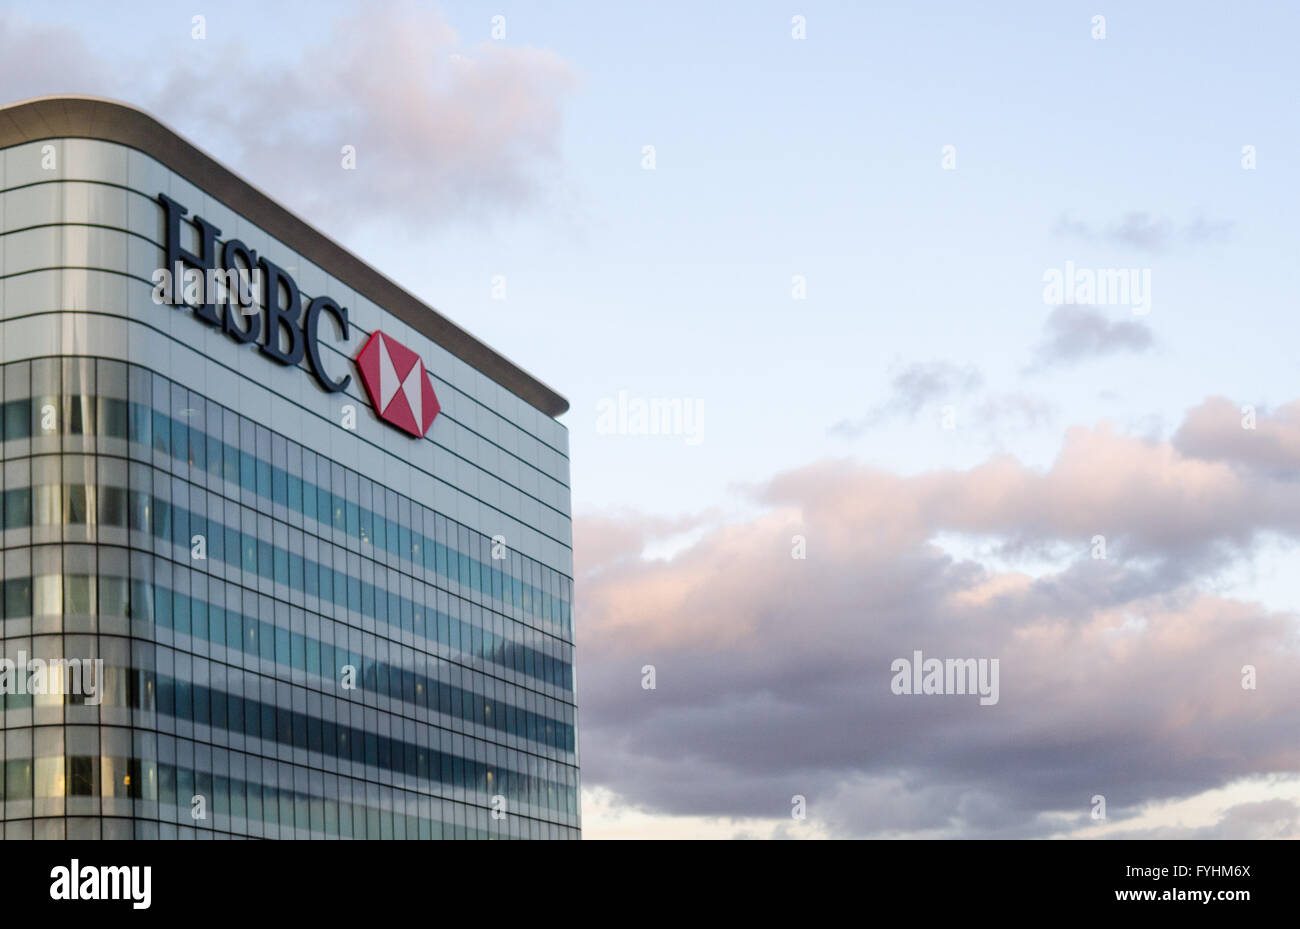 London, England - February 27, 2015: The HSBC logo tops a skyscraper that houses the HSBC global headquarters in London's Dockla Stock Photo